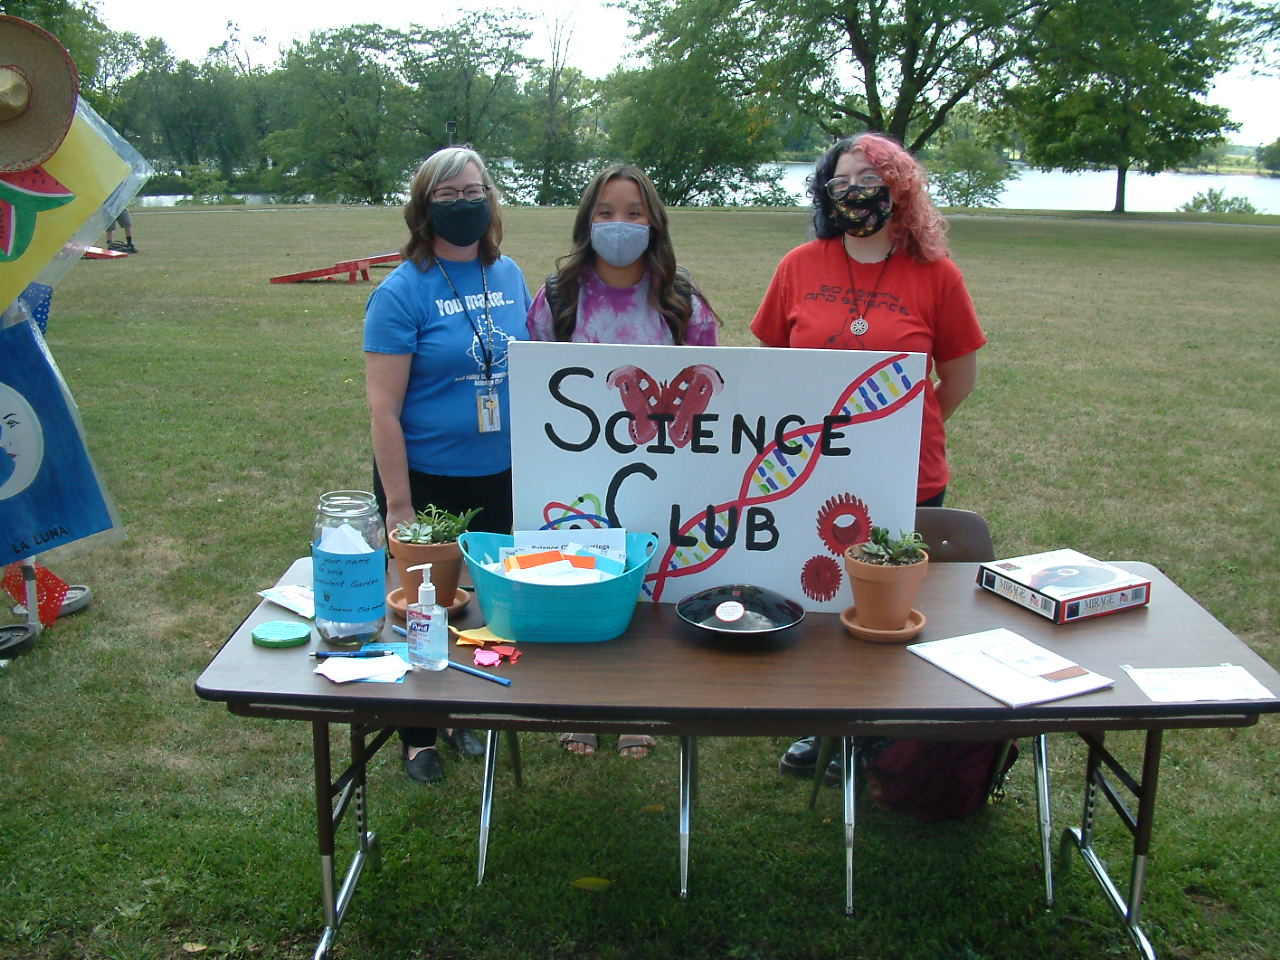 Club-representatives-at-the-Science-Club-booth-from-left-to-right_-Lori-Anton,-Lydia-Anton,-and-Gretchen-Thomas.JPG